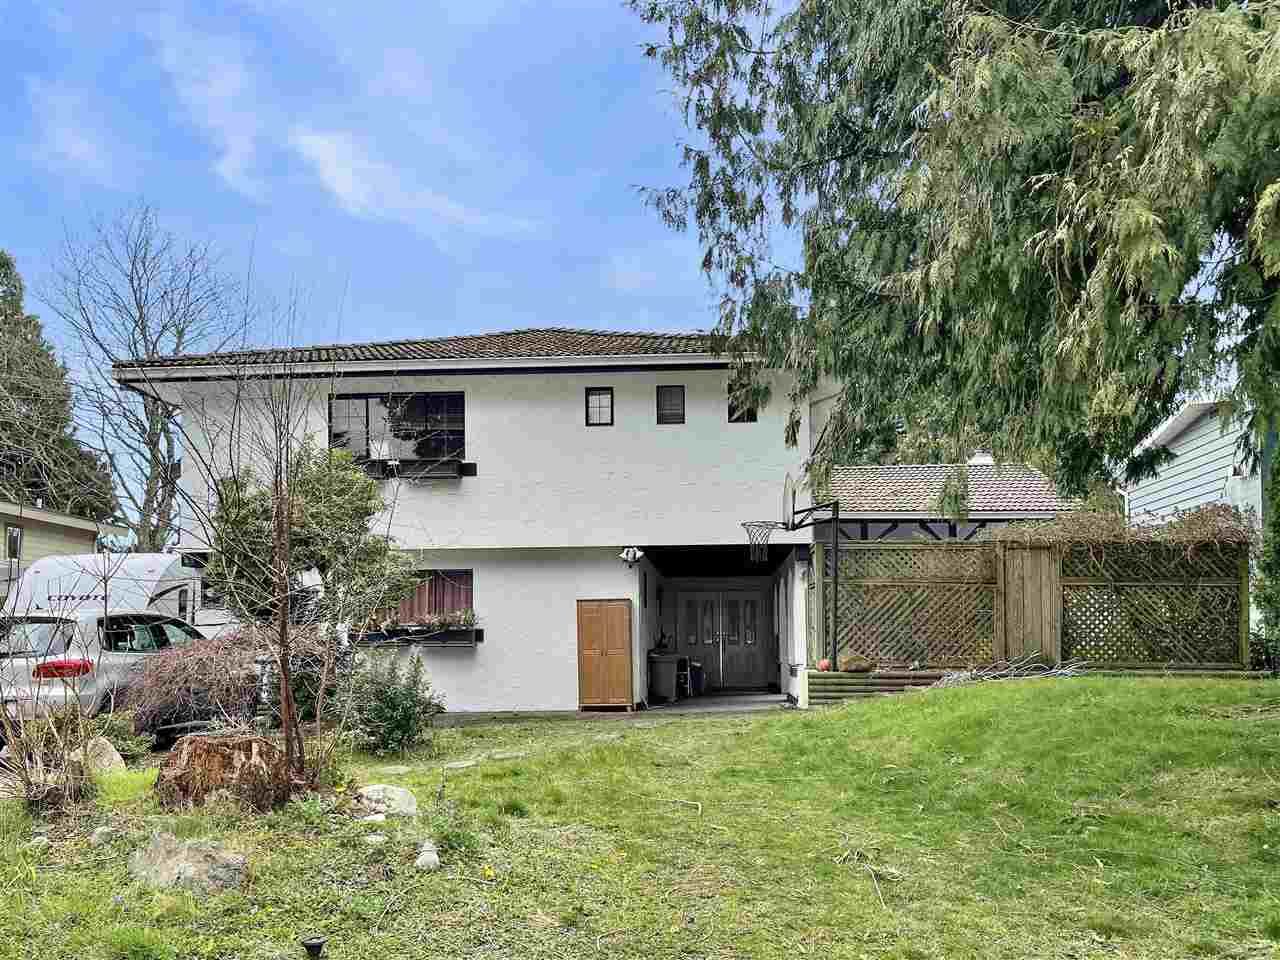 Hot new listing! Just listed in Pebble Hill, Tsawwassen